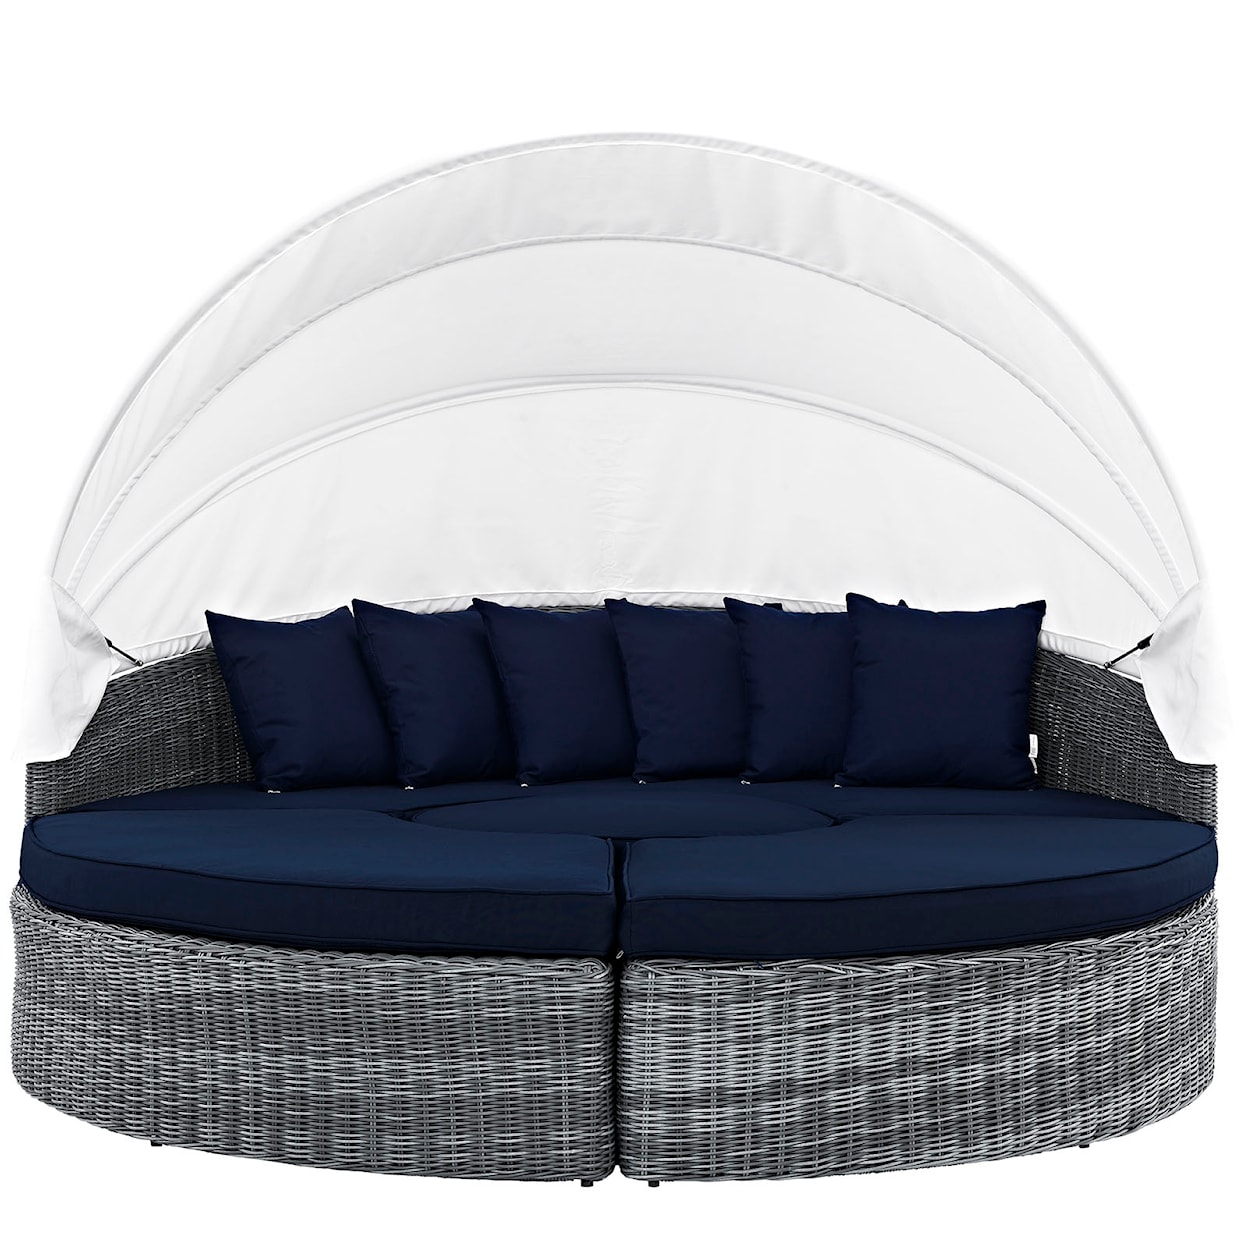 Modway Summon Outdoor Canopy Daybed